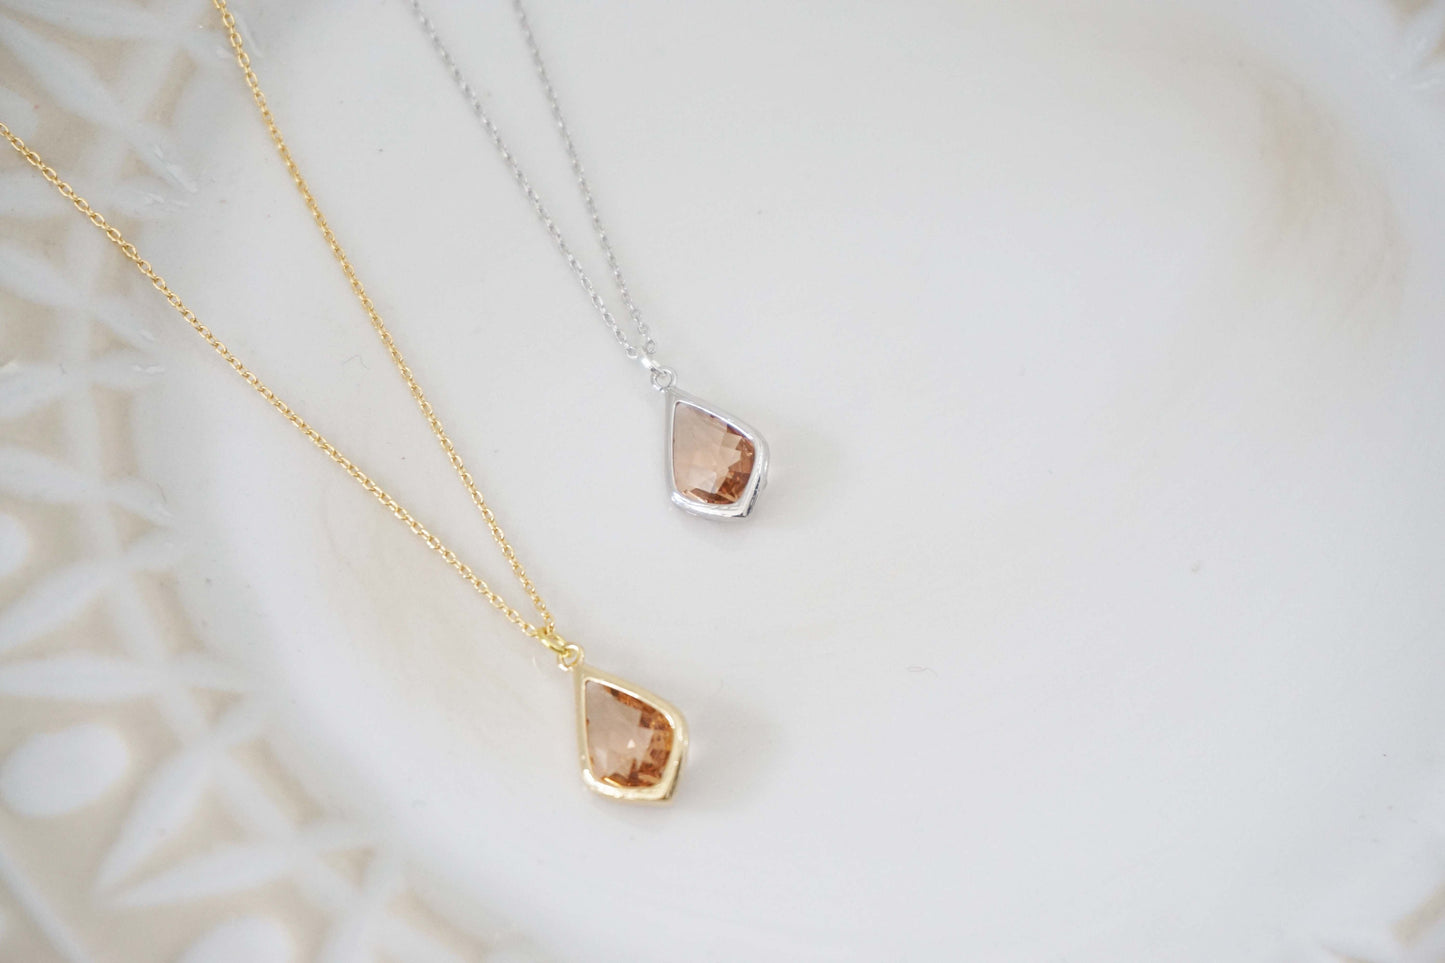 Champagne Gem Necklace | Bridesmaid Necklaces | Wedding Jewelry | NCHPG8, NCHPS8